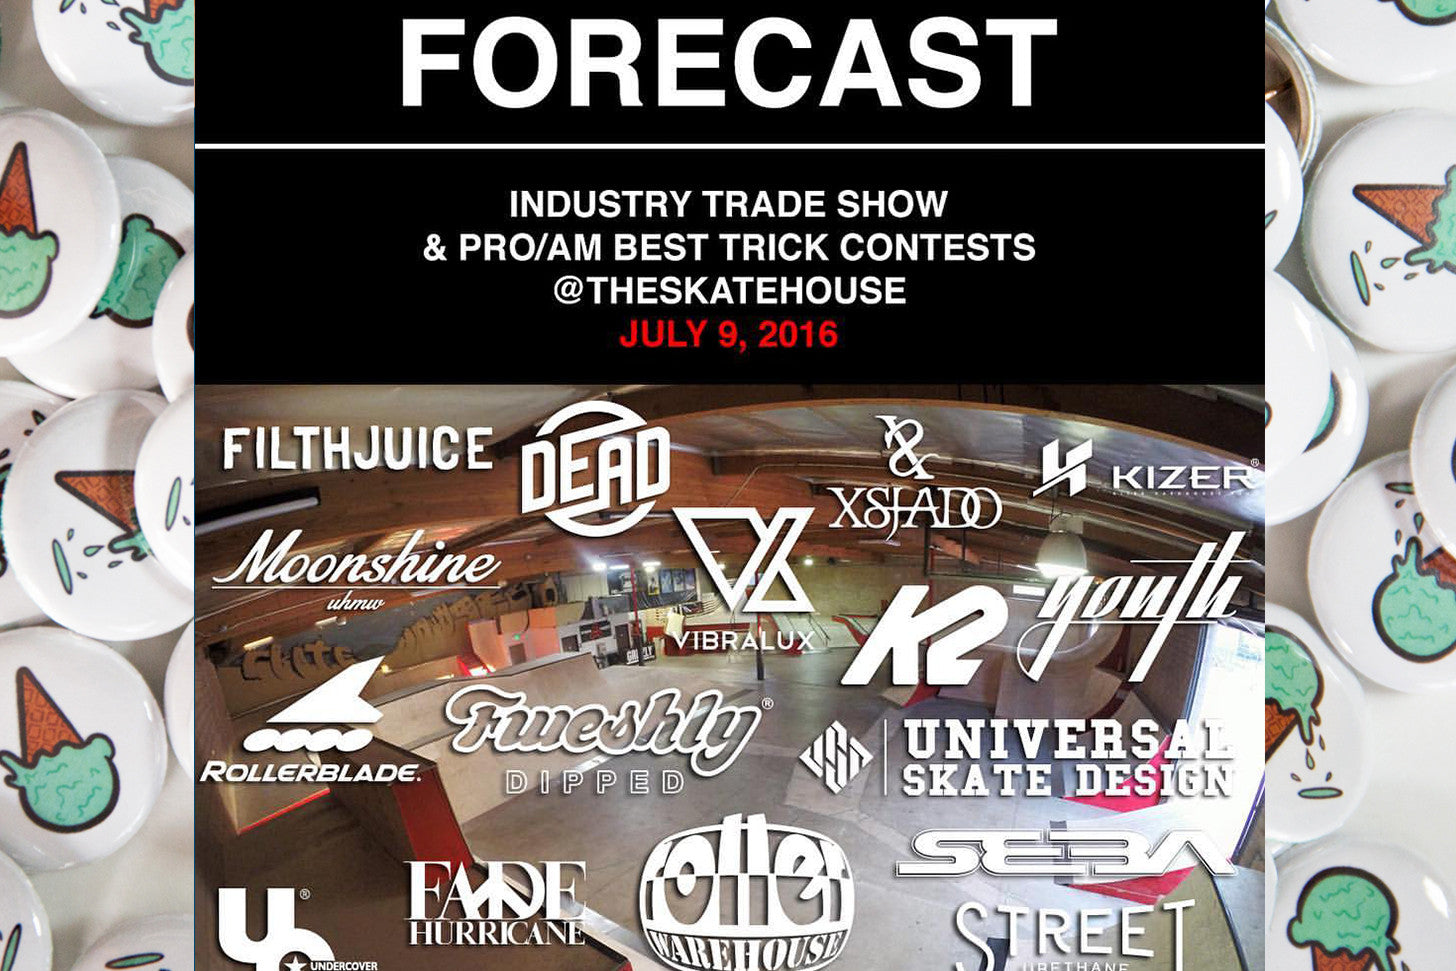 FORECAST INDUSTRY TRADE SHOW AND PRO/AM BEST TRICK